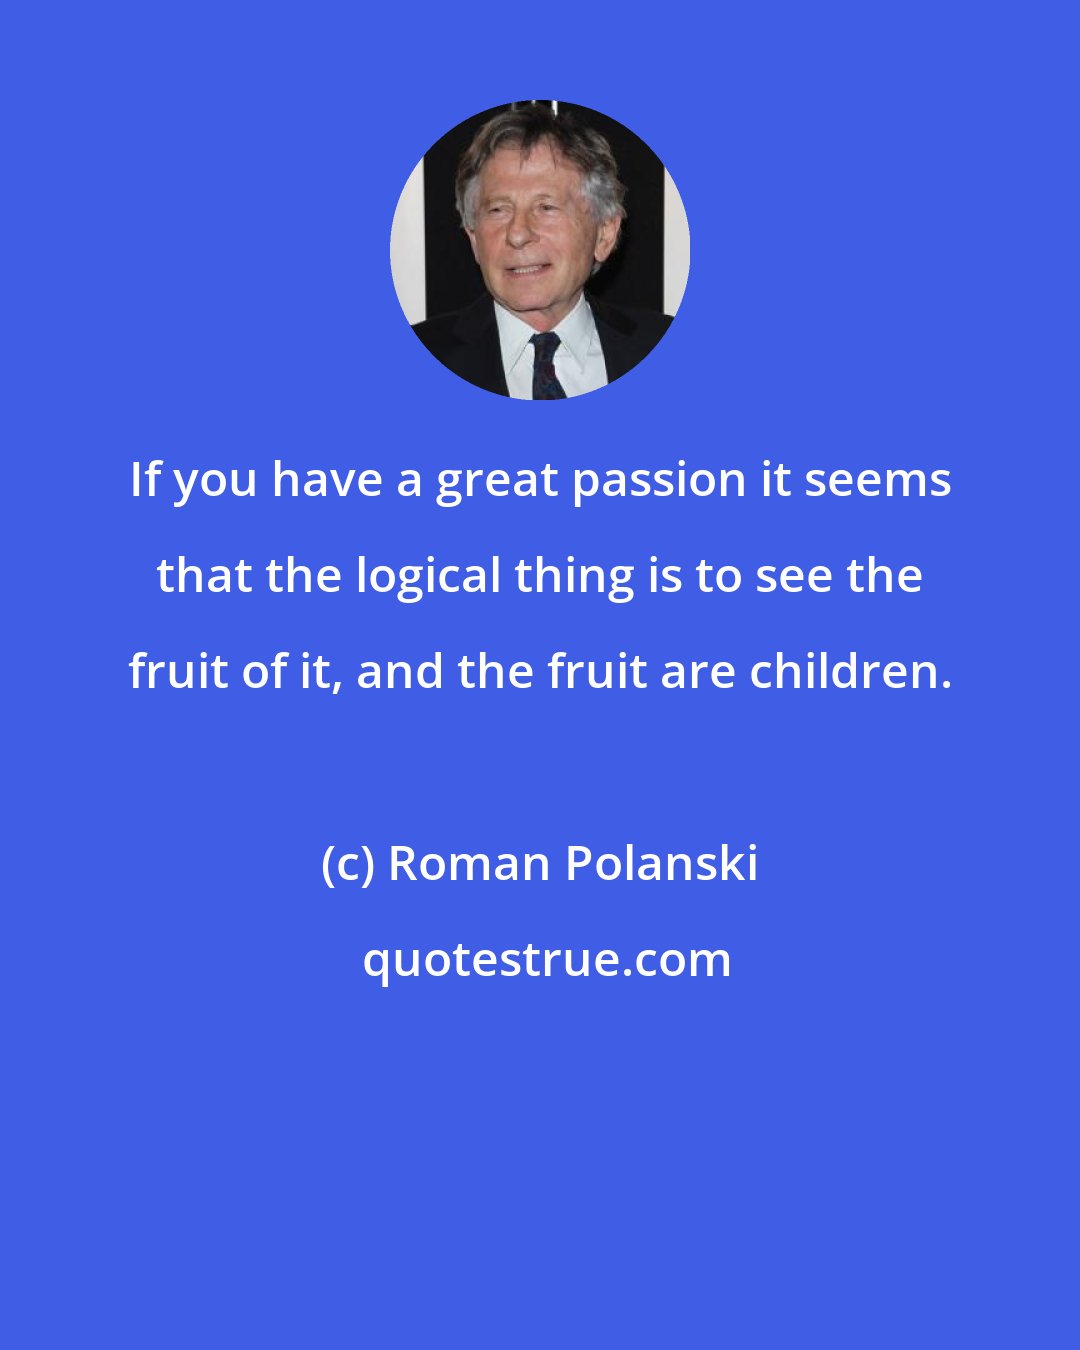 Roman Polanski: If you have a great passion it seems that the logical thing is to see the fruit of it, and the fruit are children.